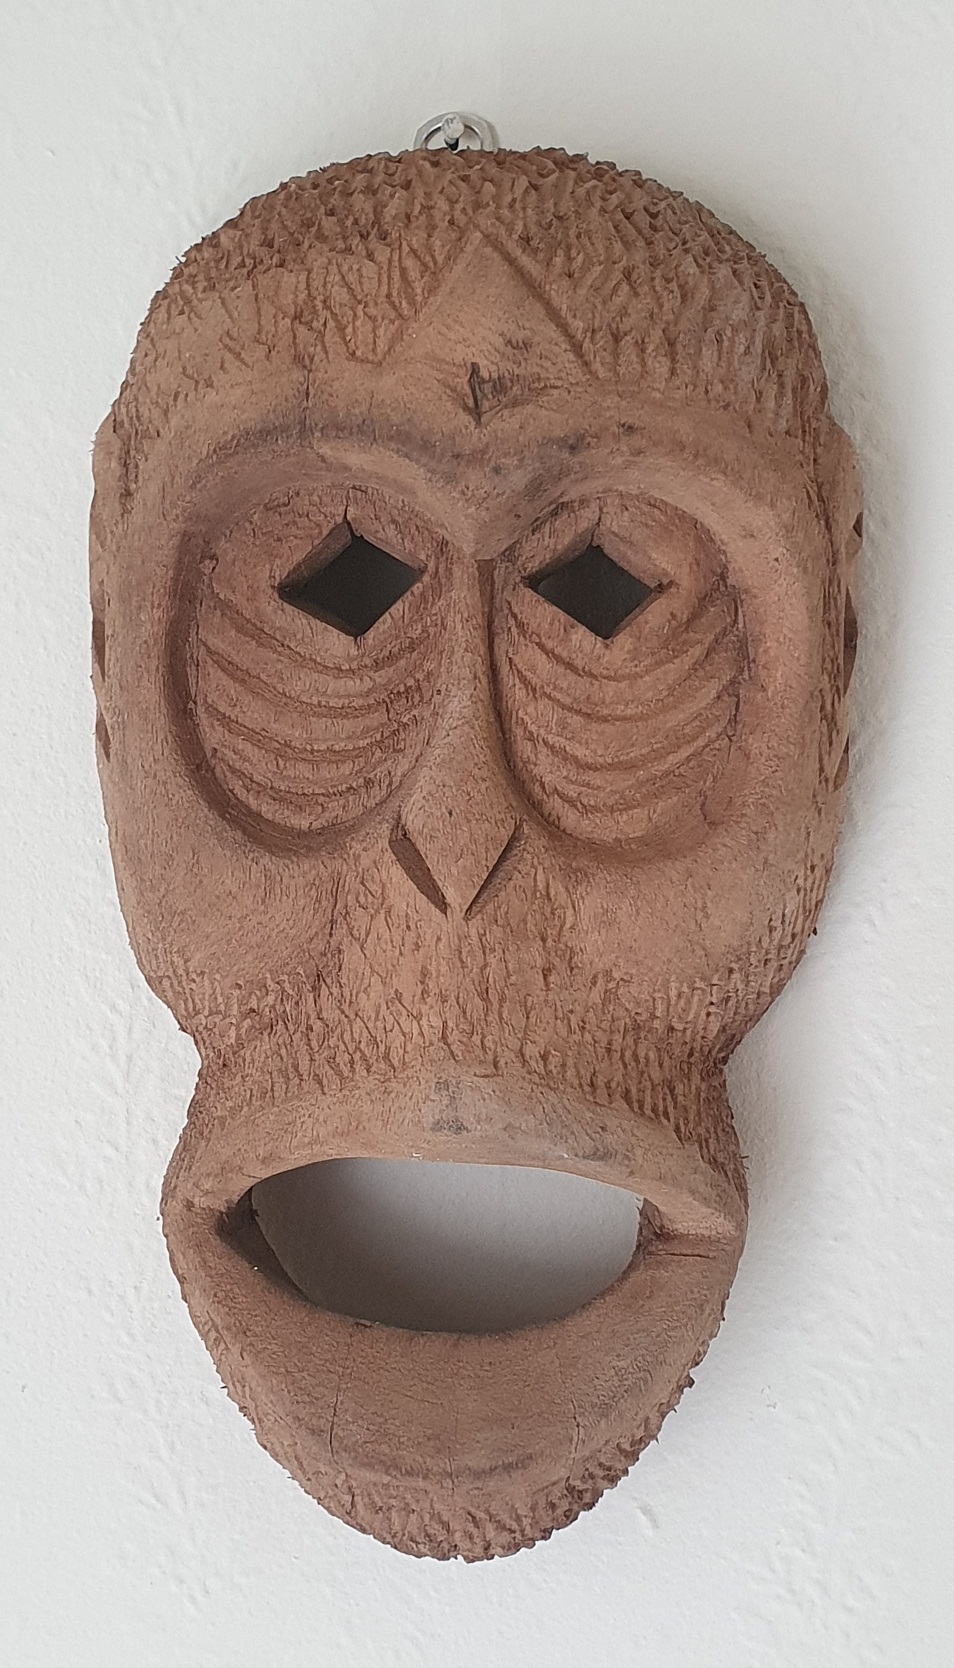 chimpanzee mask from Sierra Leone carved by a man using his feet